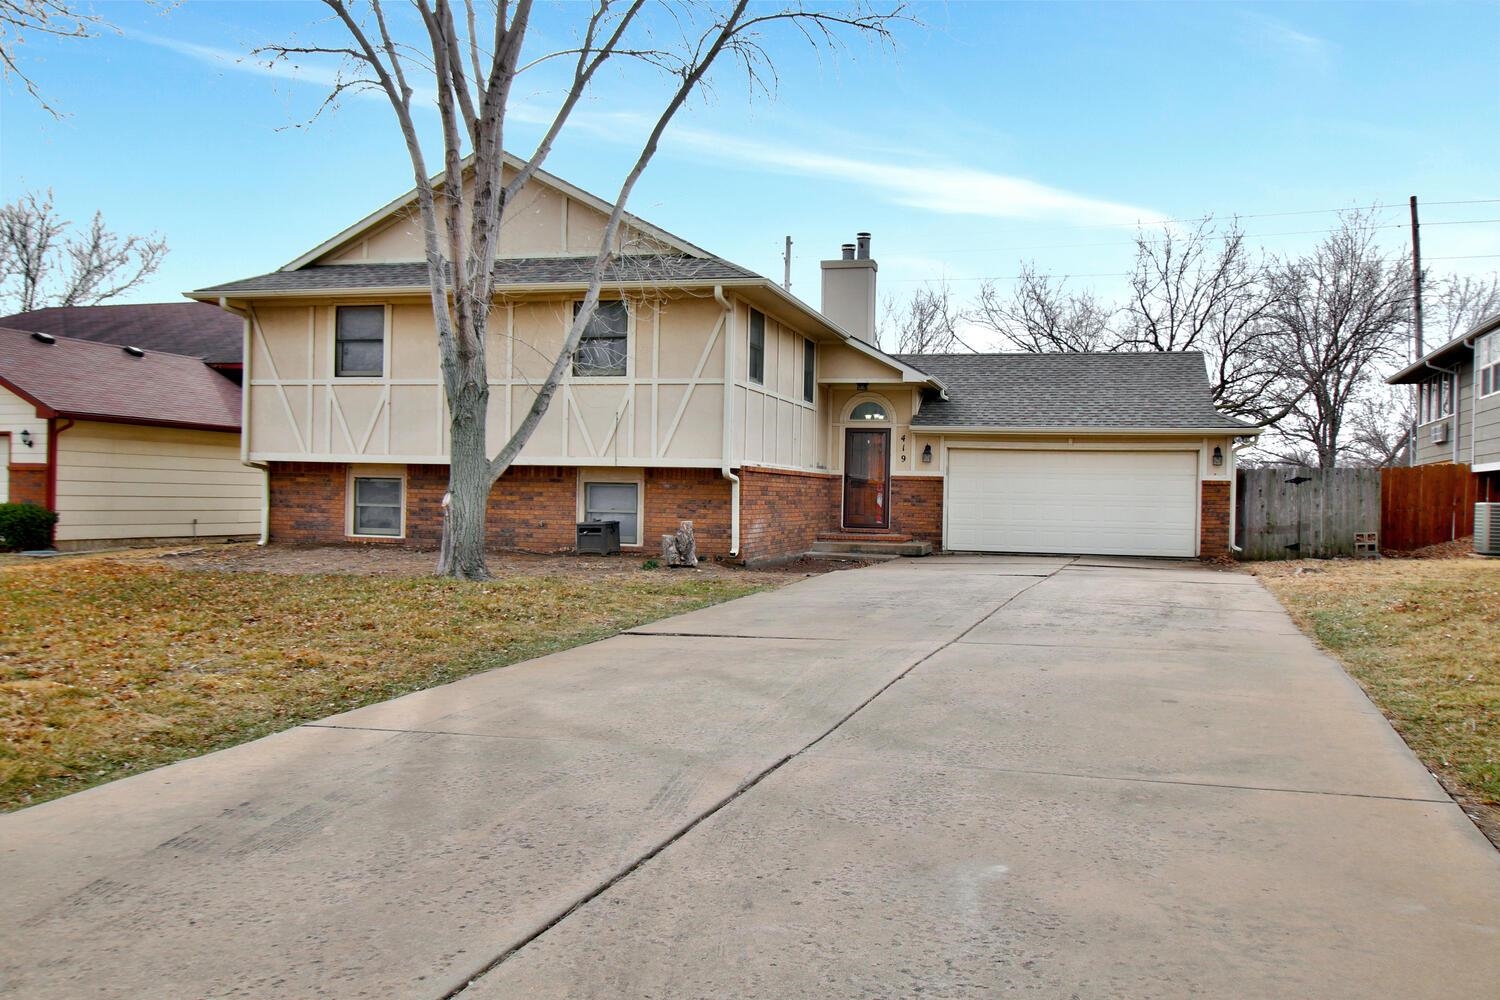 This beautiful 5 bedroom, 3 bath, 2 car garage home nestled in the heart of Derby, KS. As you walk i